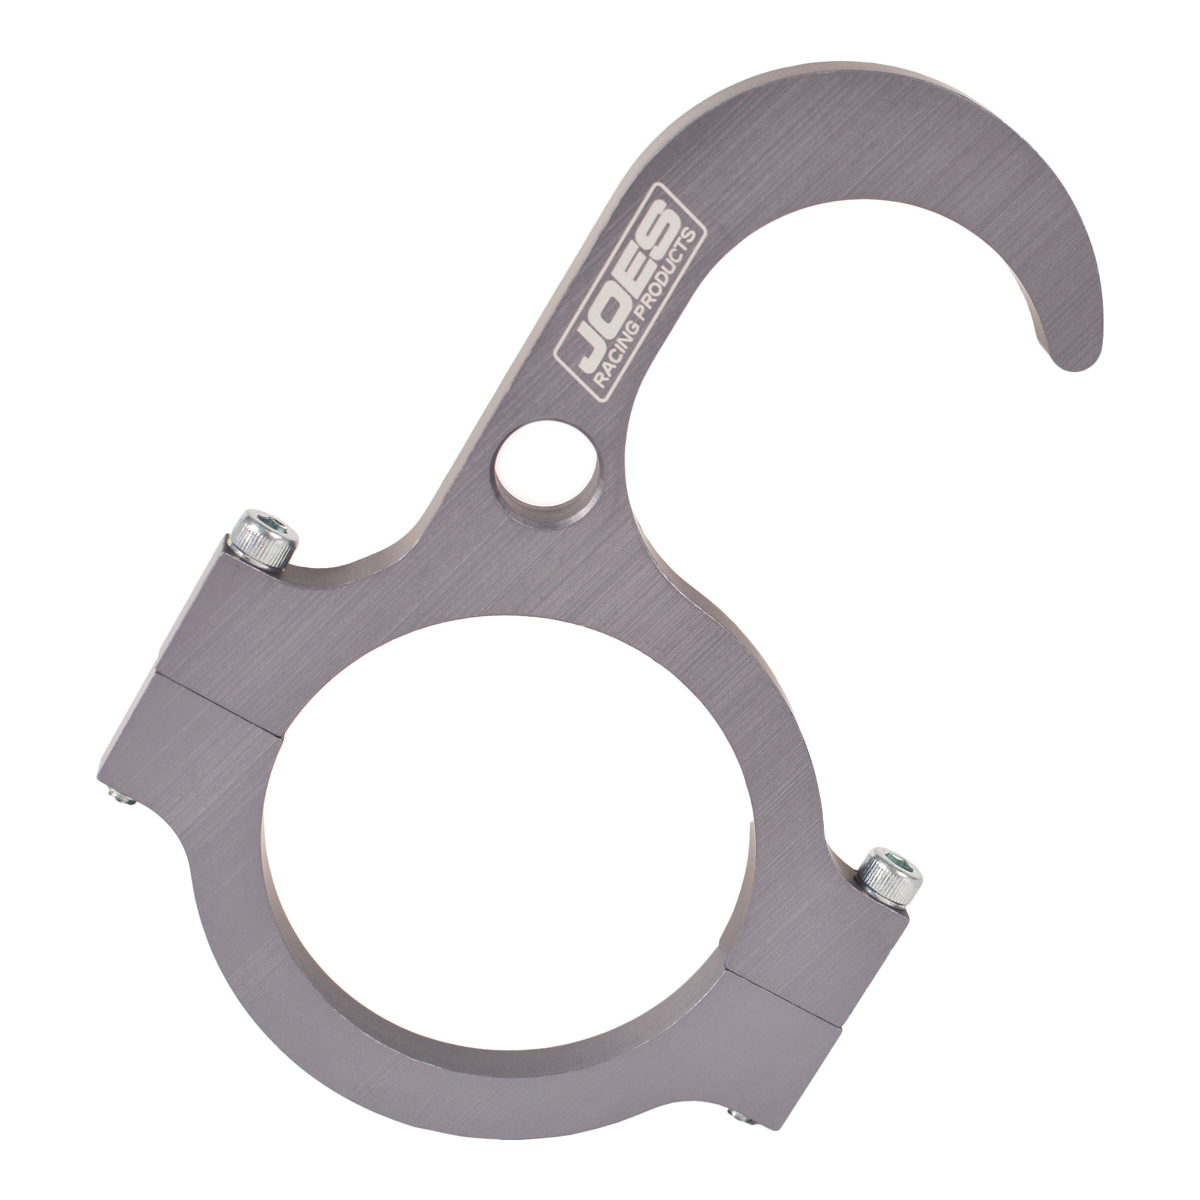 Joes Racing Products 10702-B Steering Wheel Hook, Clamp-On, Aluminum, Black Anodized, 1-1/2 in OD Tube, Each